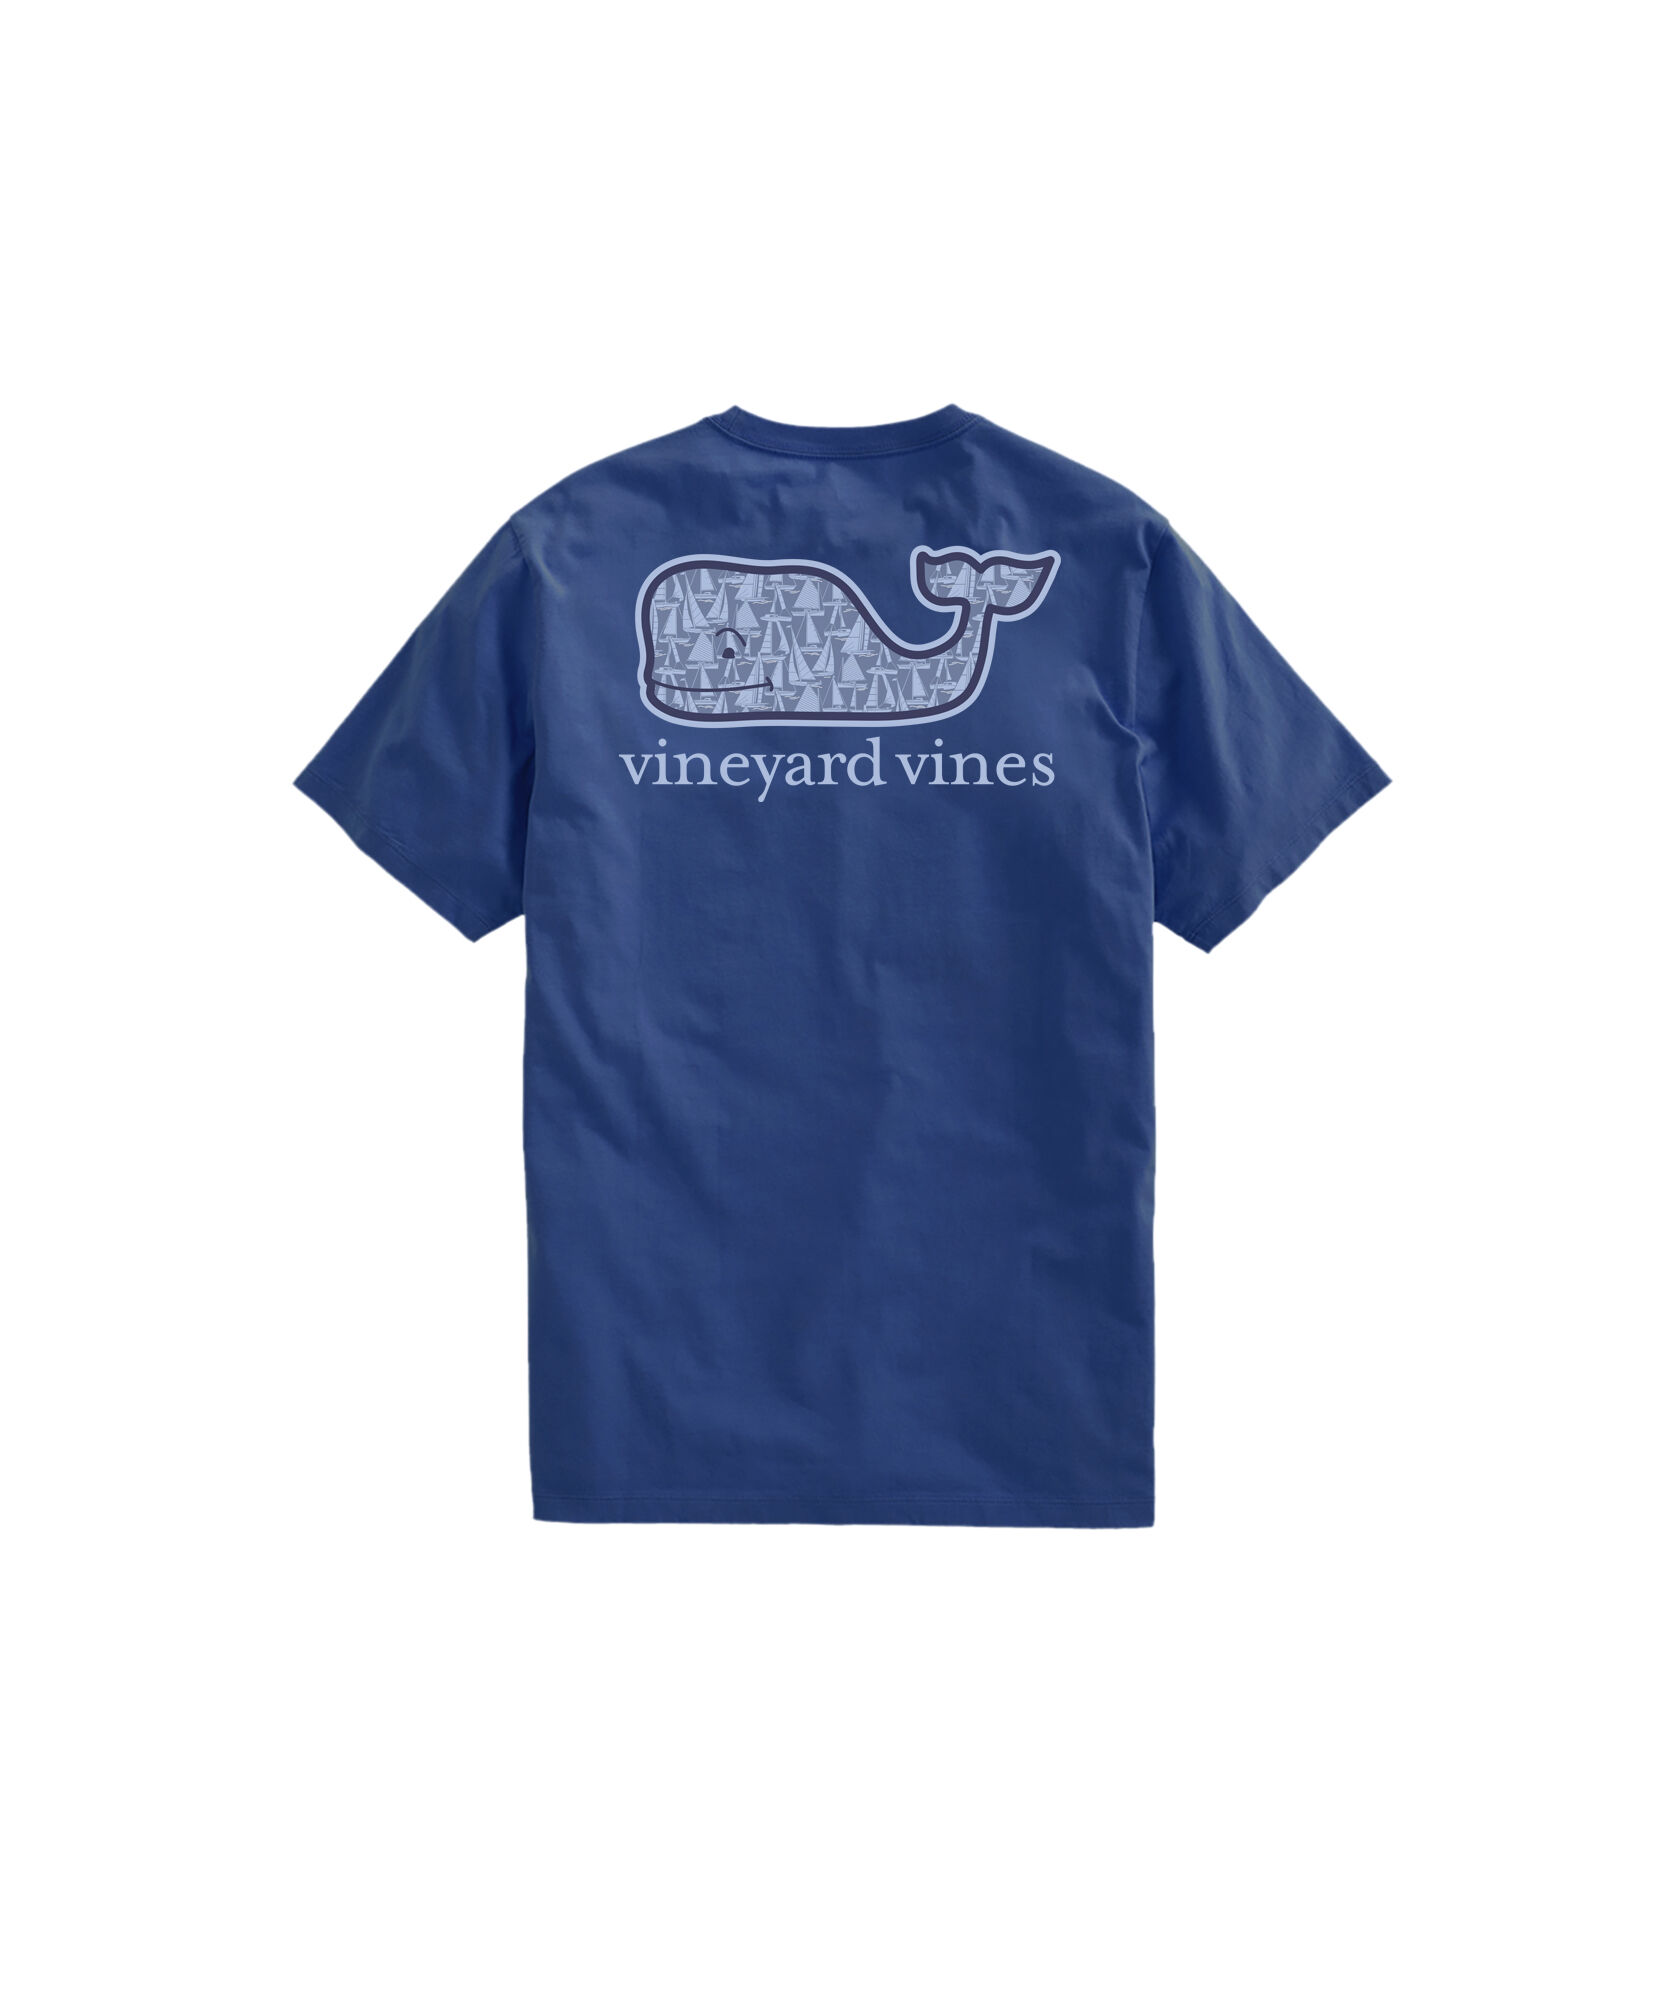 Vineyard Vines Outlet: Men's or Women's Whale Short-Sleeve Tee $14 & More + Free Shipping on $125+